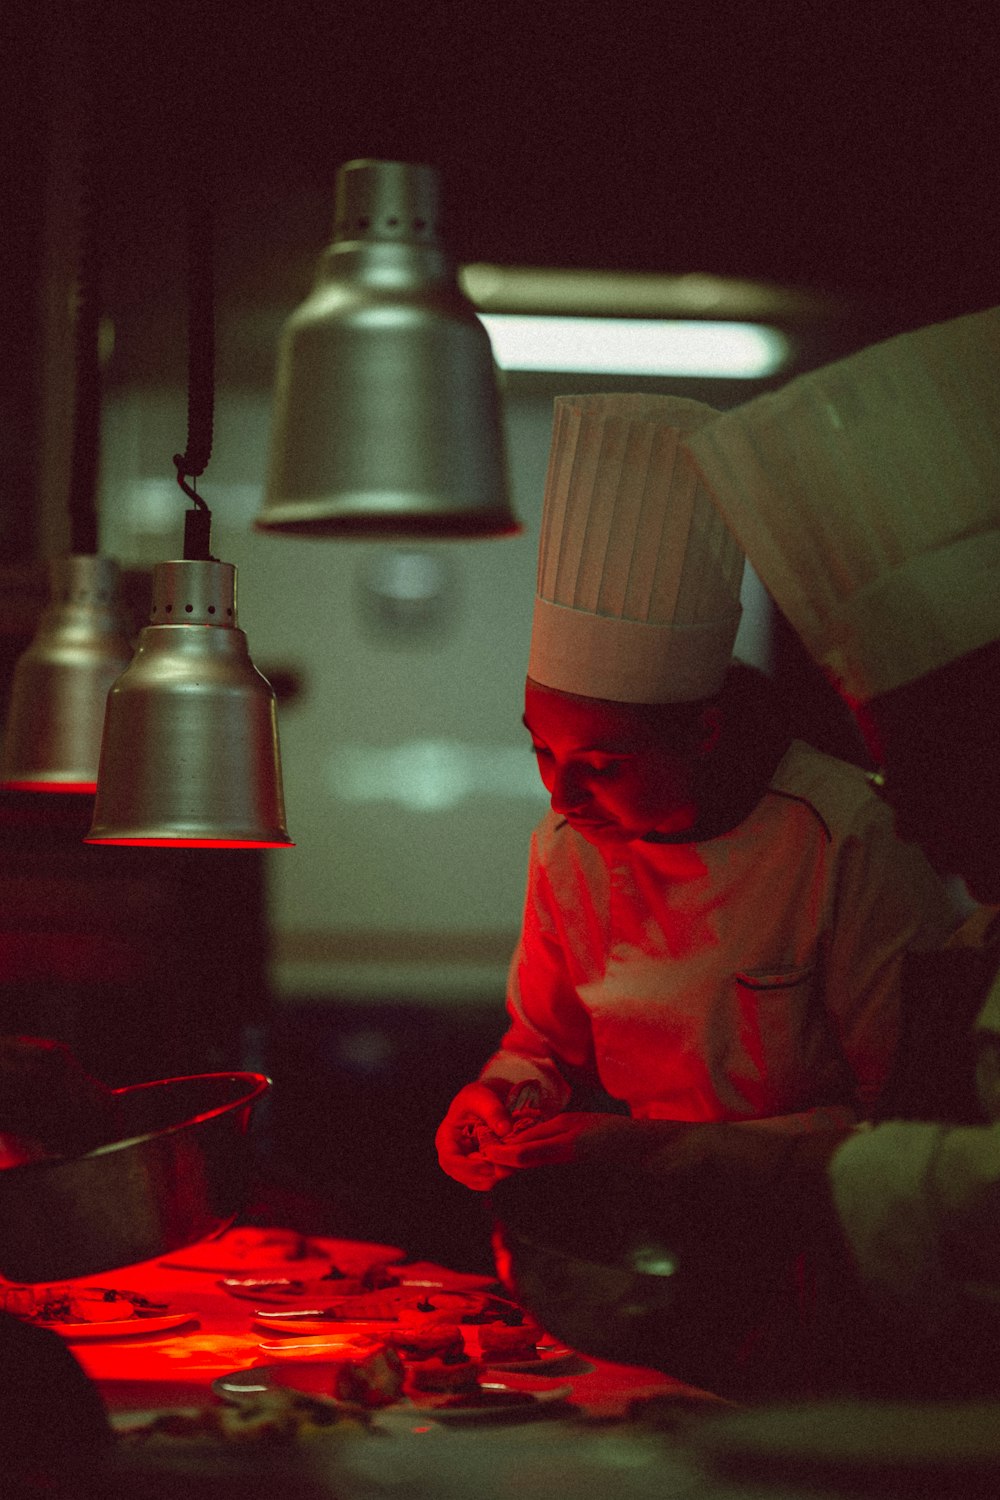 a chef preparing food in a kitchen at night